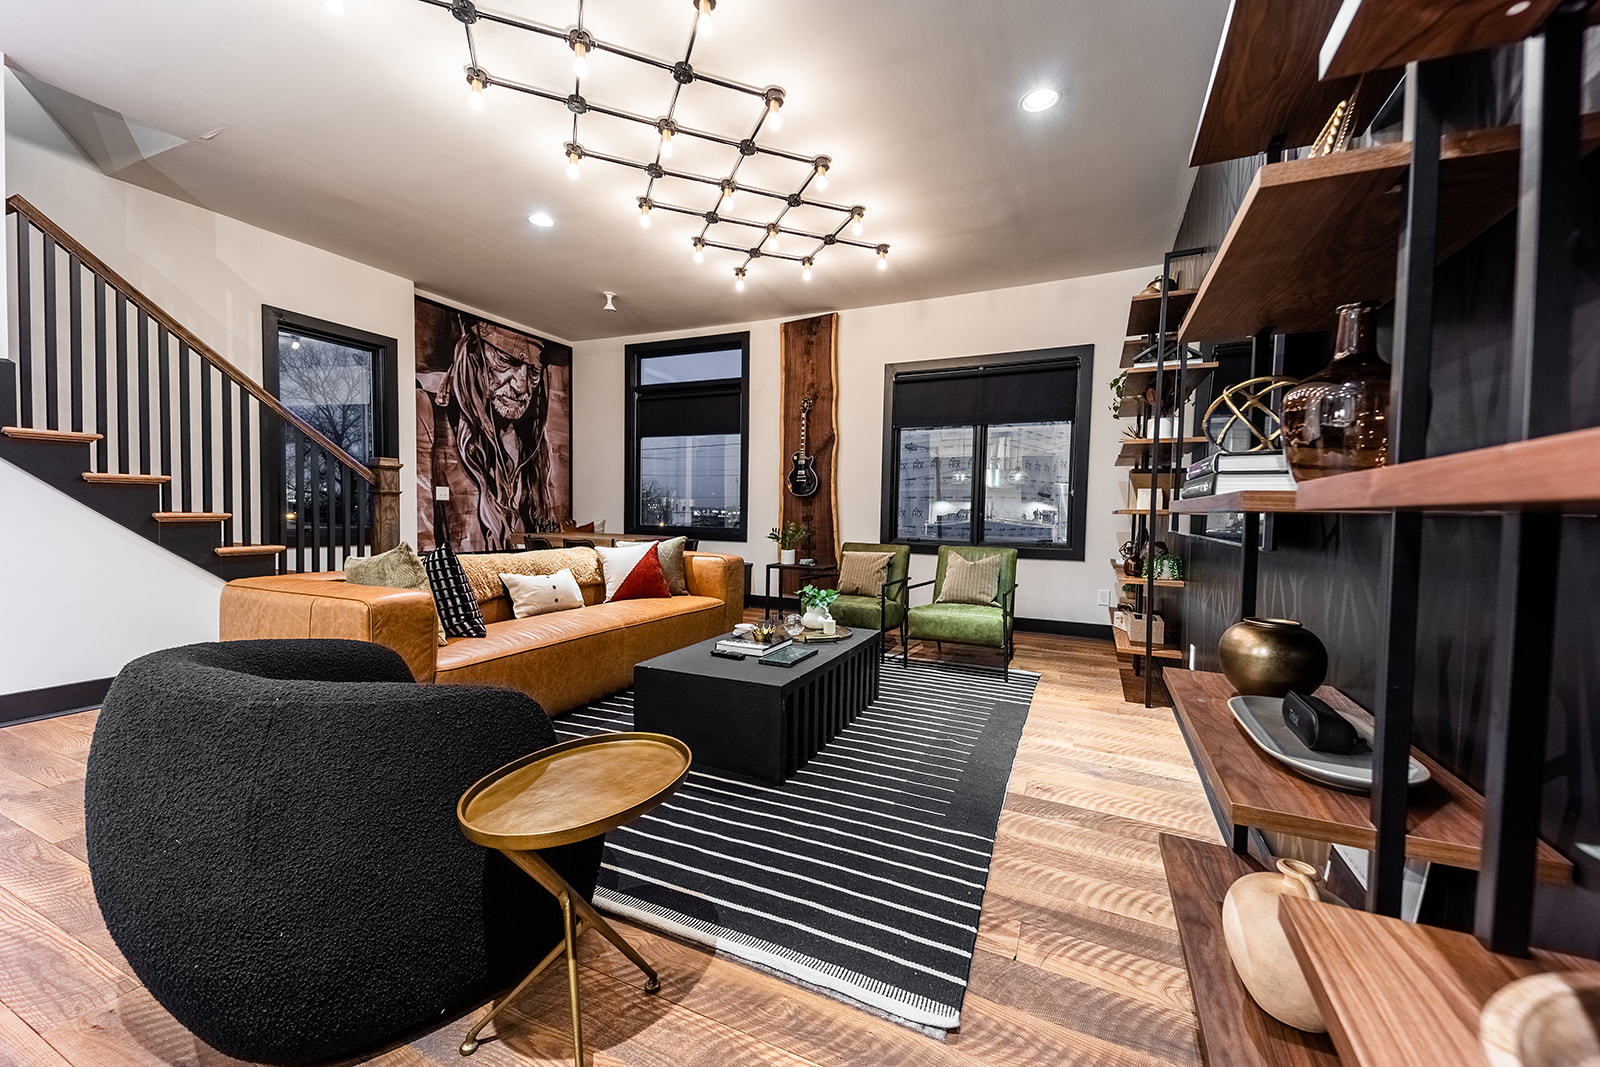 Extremely detailed spacious living area with designer luxury furnishings, 85 in flat screen TV, flooring from a 150 year old barn, custom murals/wall art, light fixtures and wall paper.